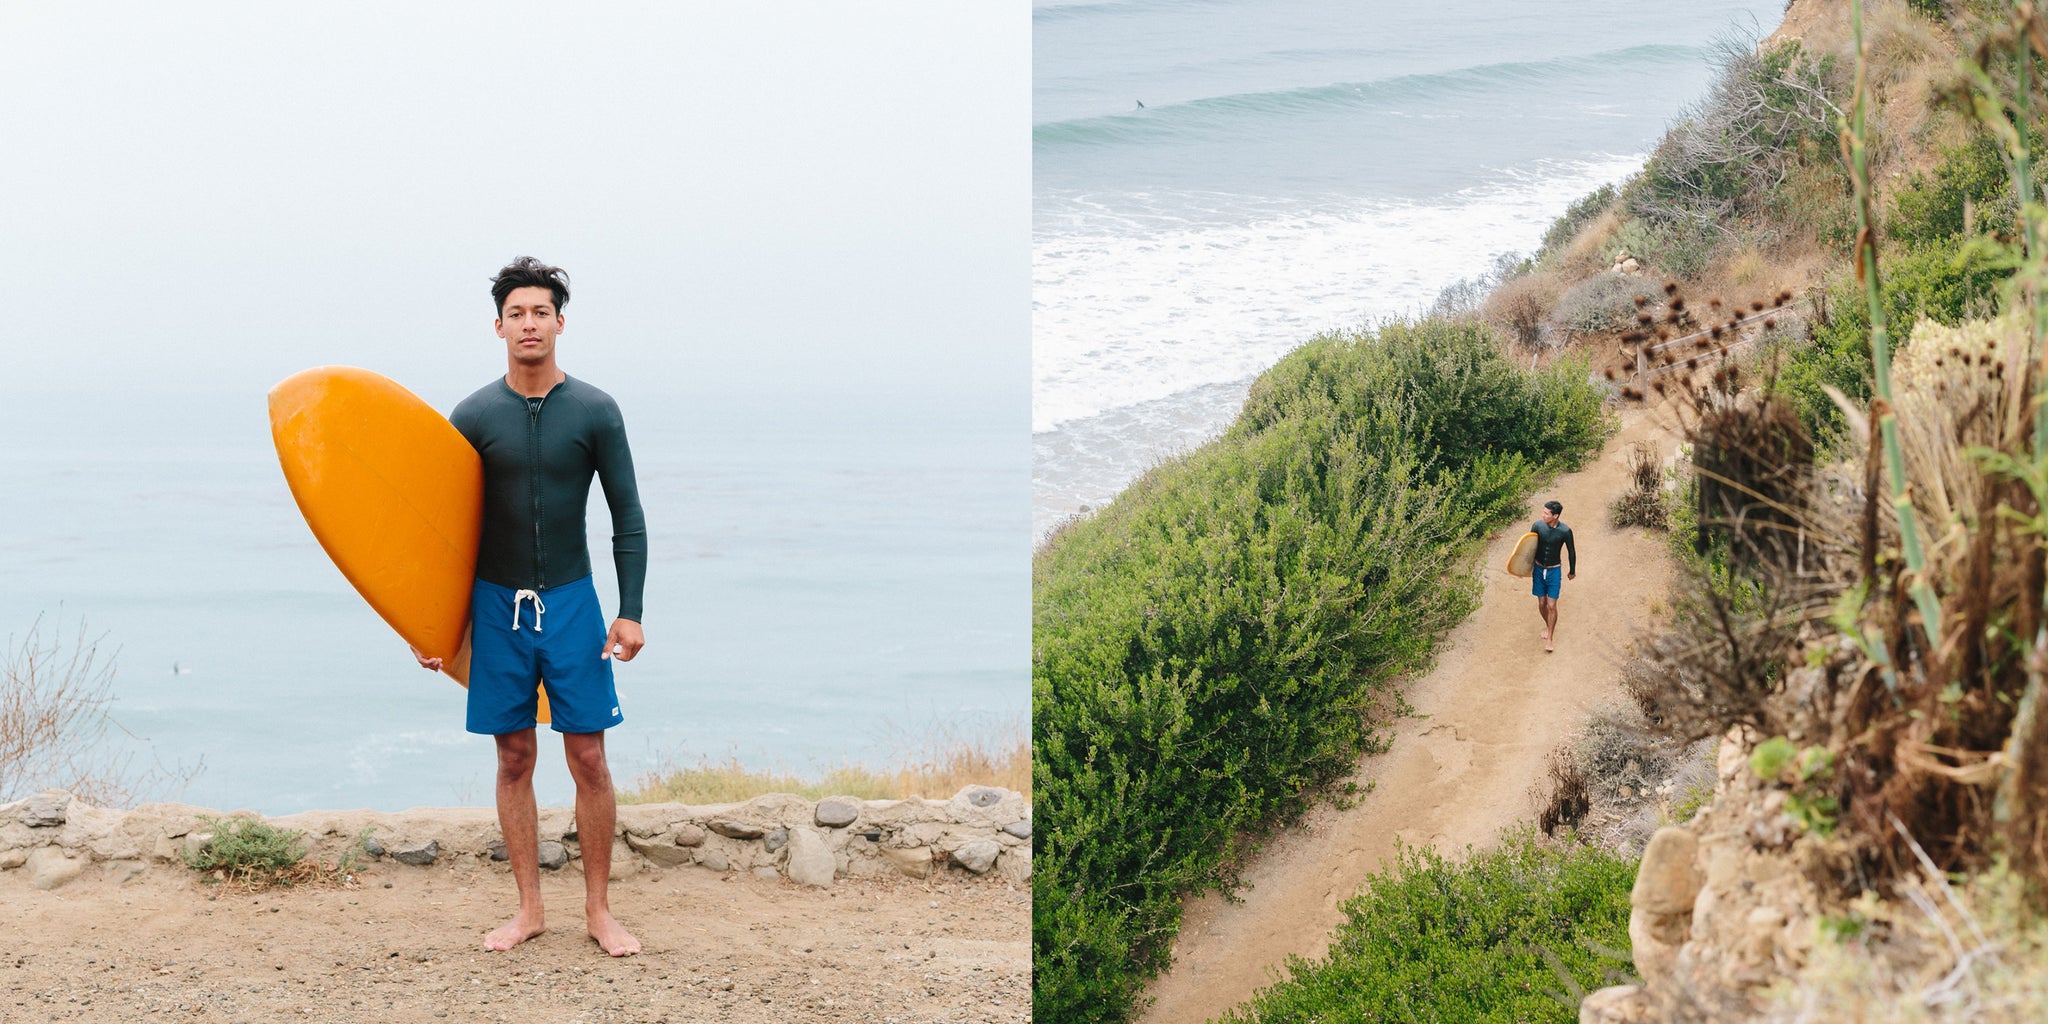 Surfing in LA by Sean Marin with Bather